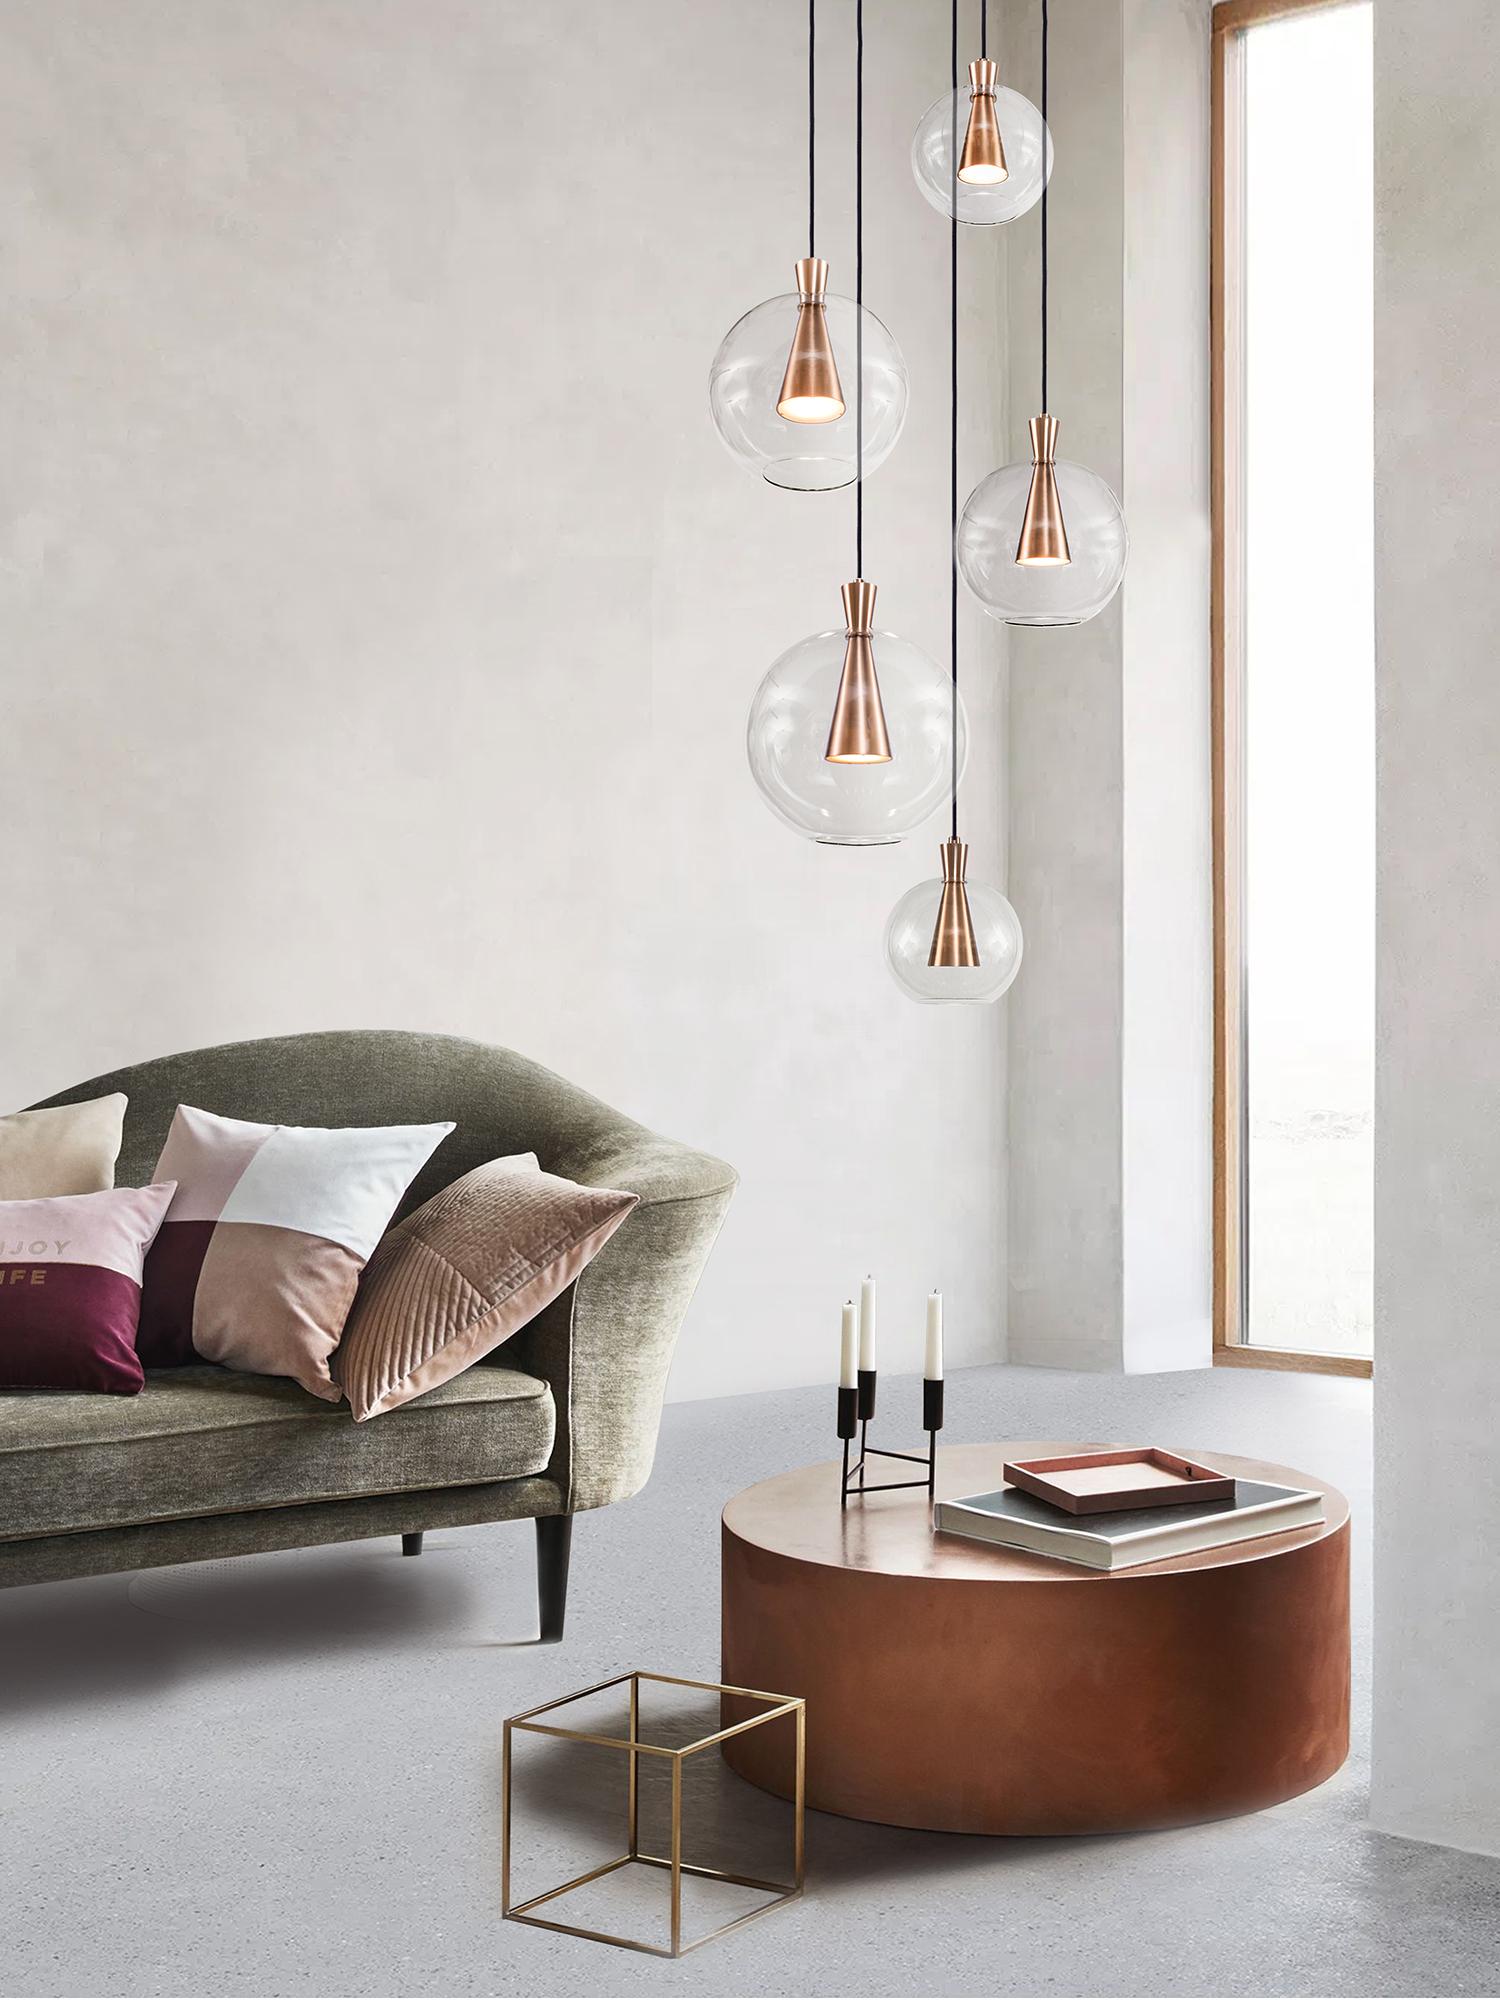 Cone is designed to showcase the beauty and timeless elegance of geometrical symmetry. Each cone is machined from a solid block of brass, with a hand-blown glass shade delicately suspended from the cones apex.